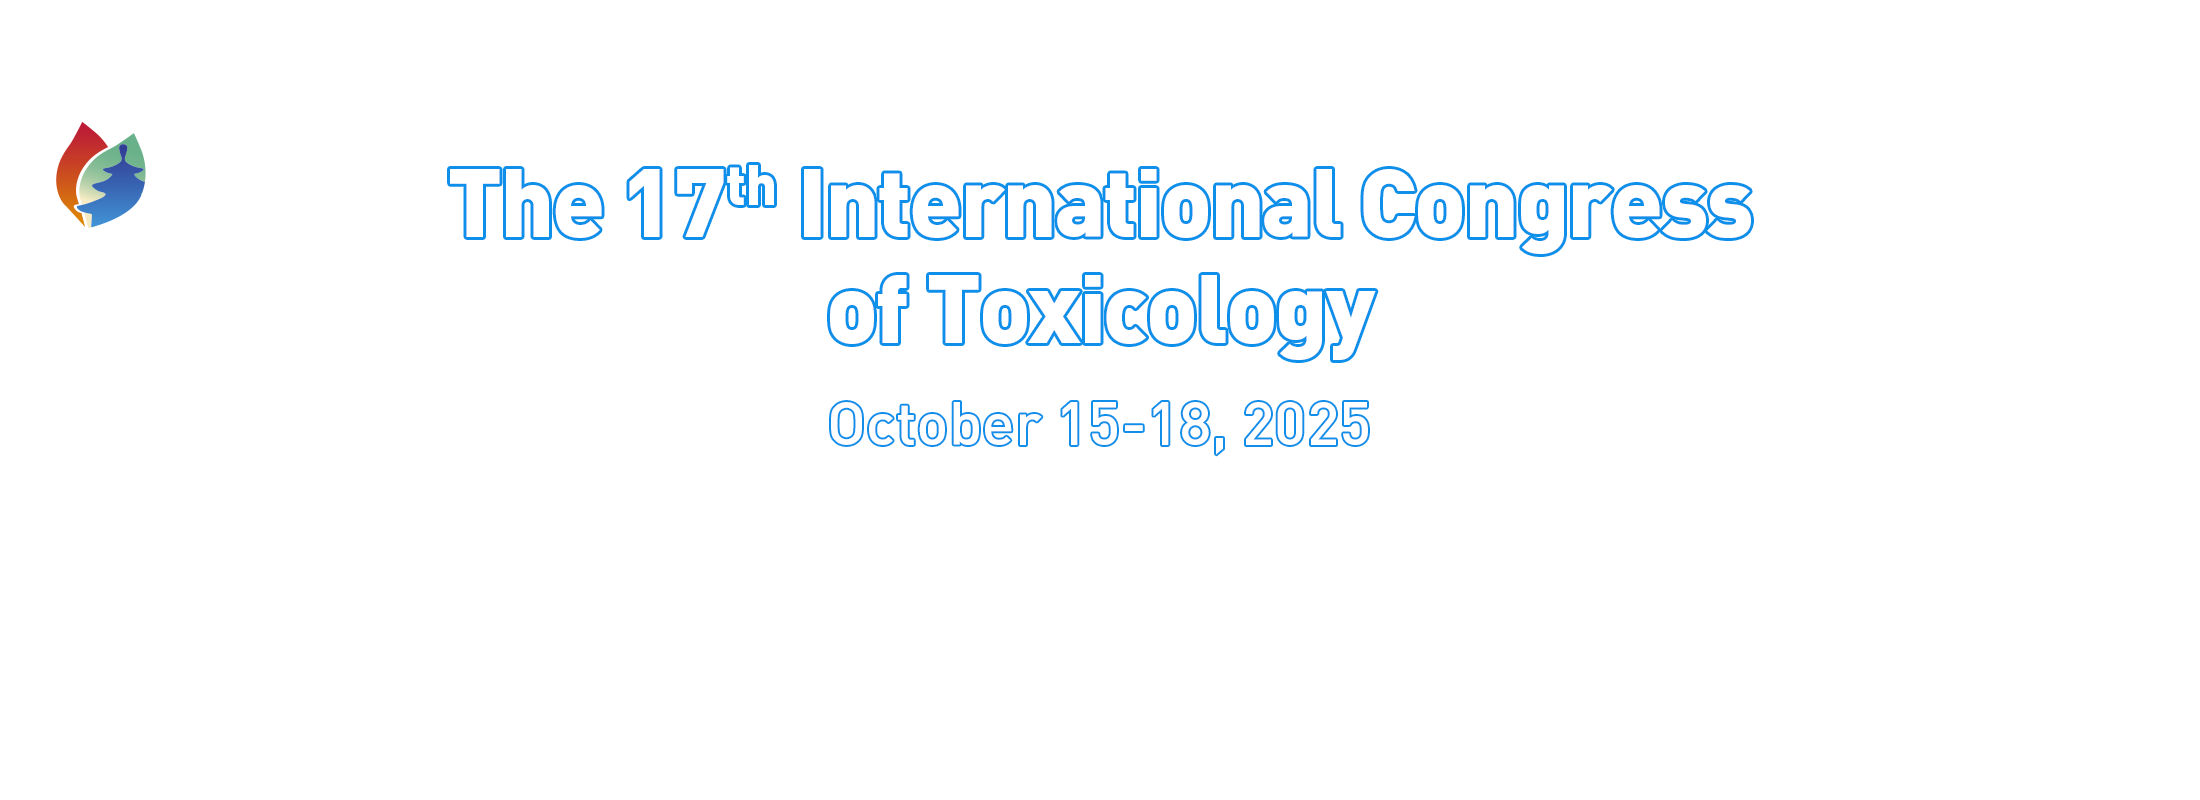 ICT2025 - The 17th International Congress of Toxicology